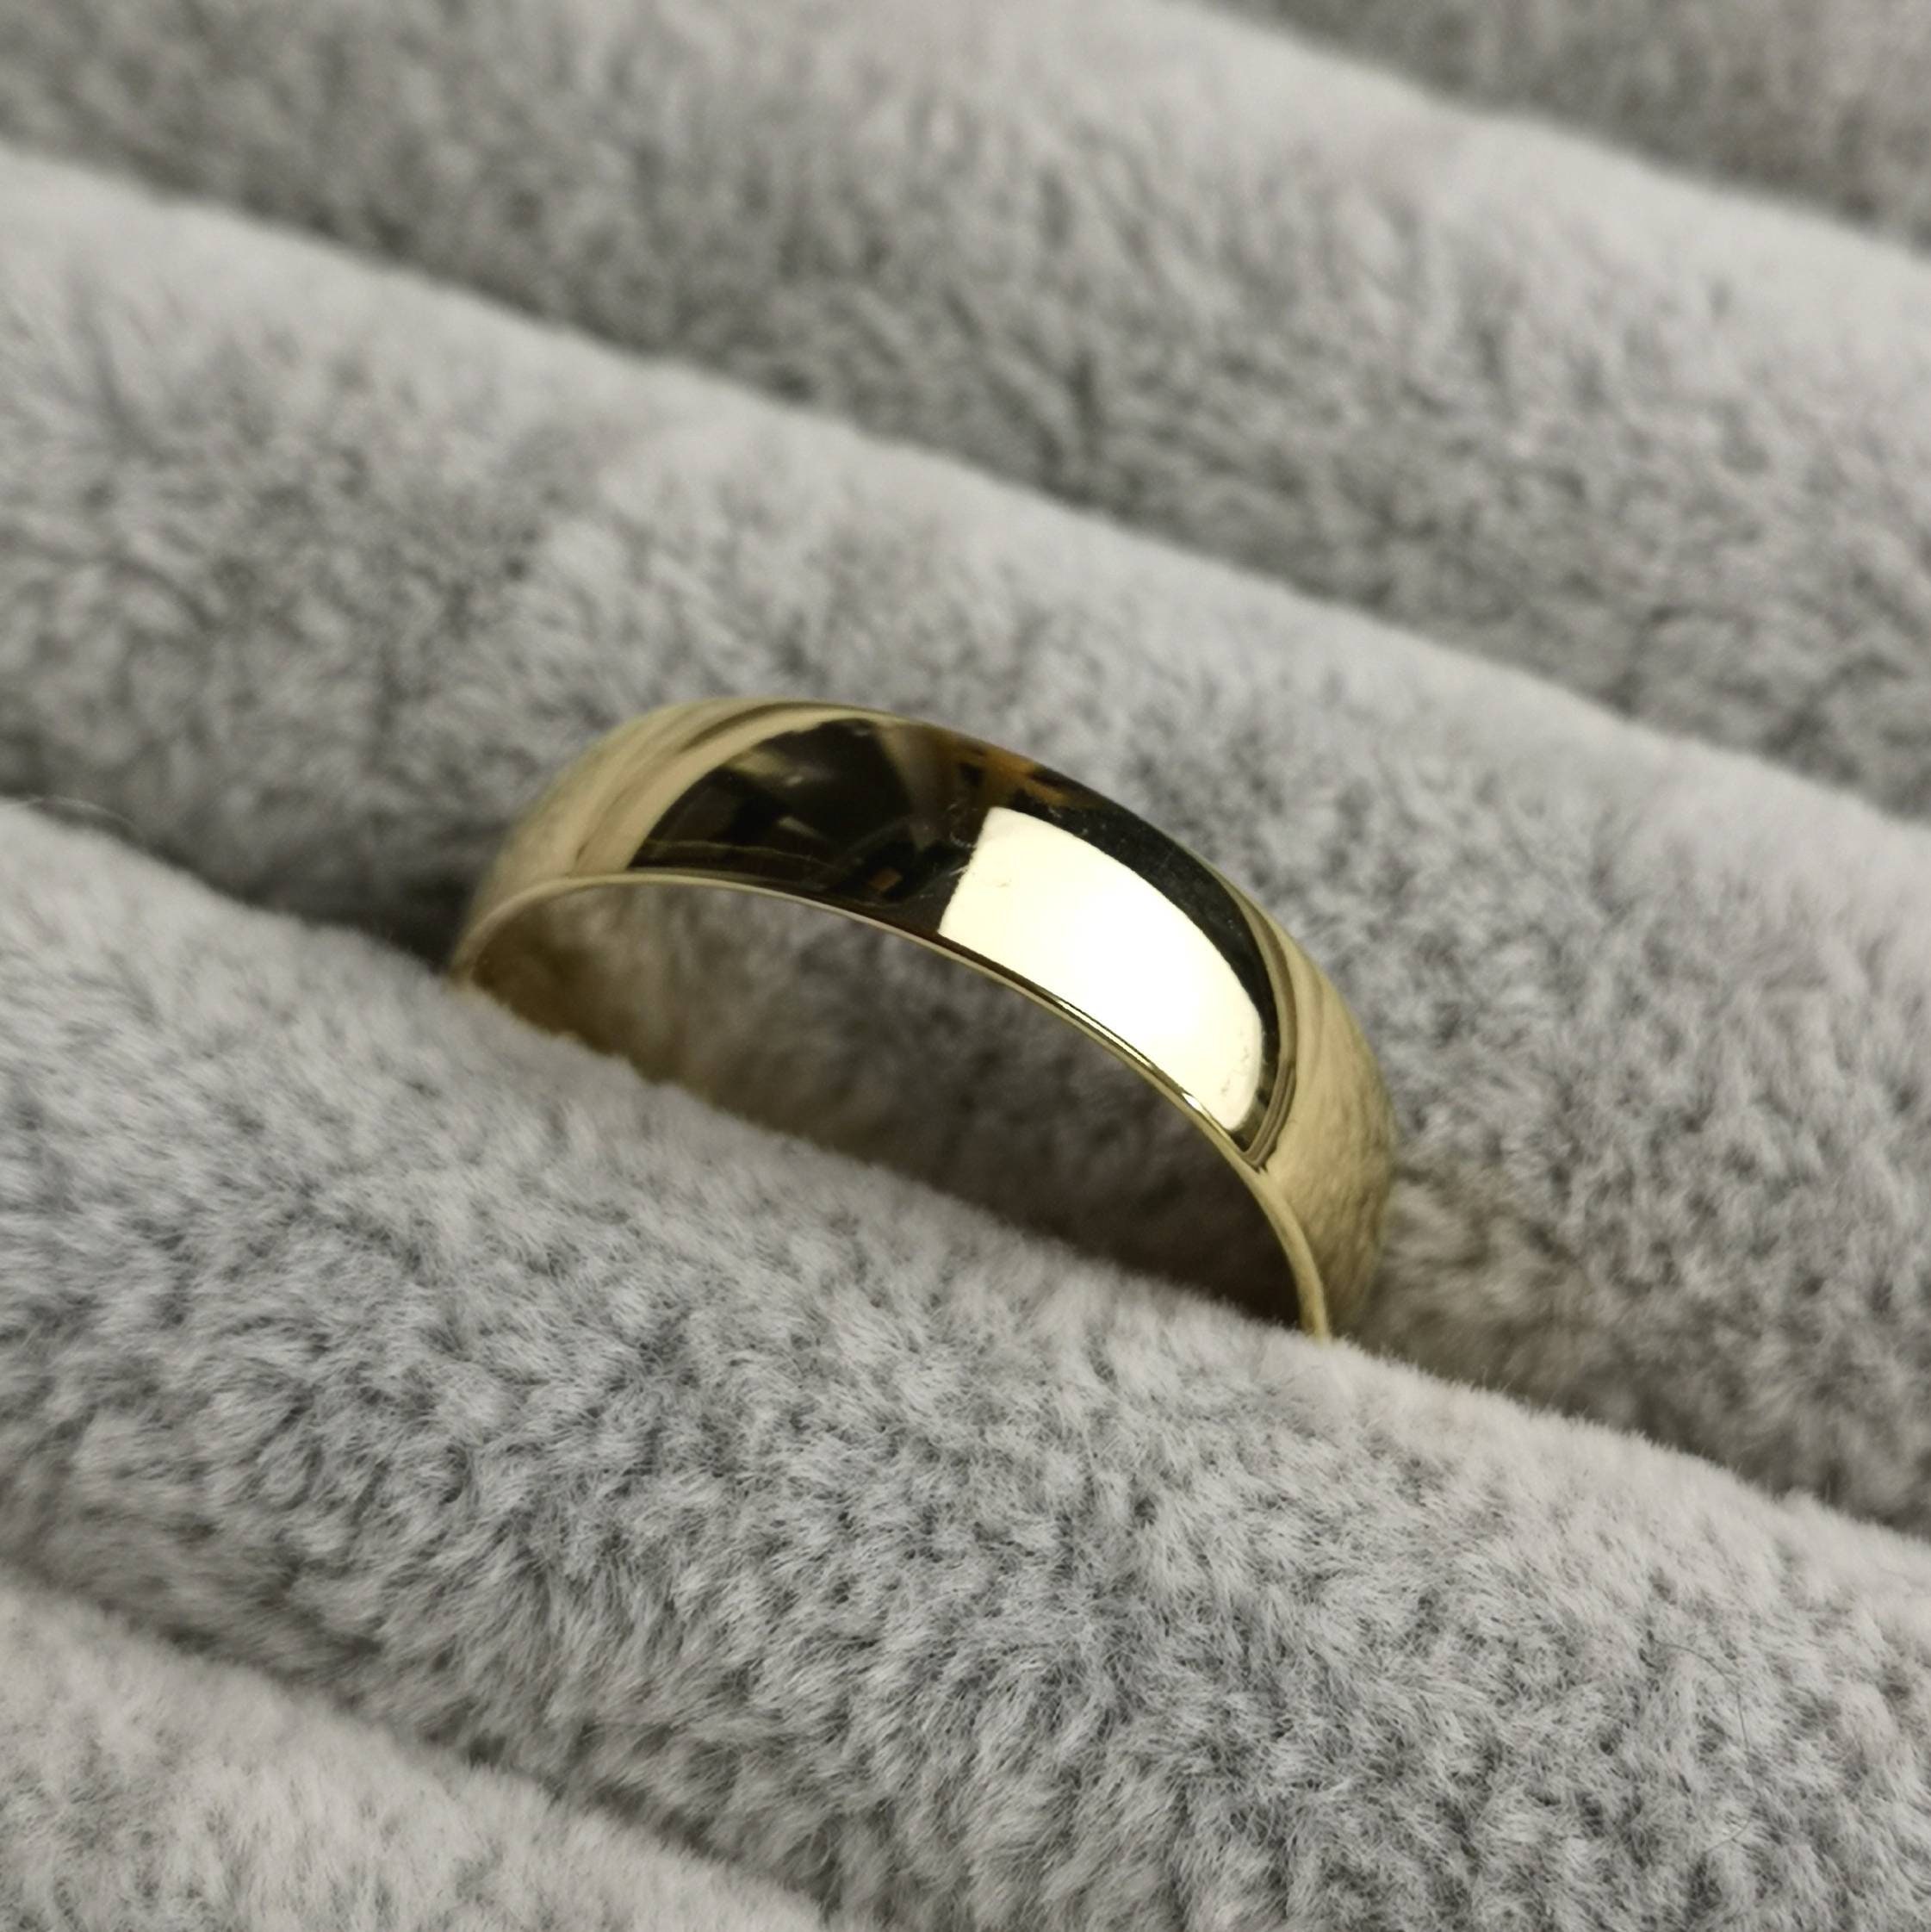 9ct or 18ct recycled Gold Ethical 5mm Wedding Ring / low | Etsy